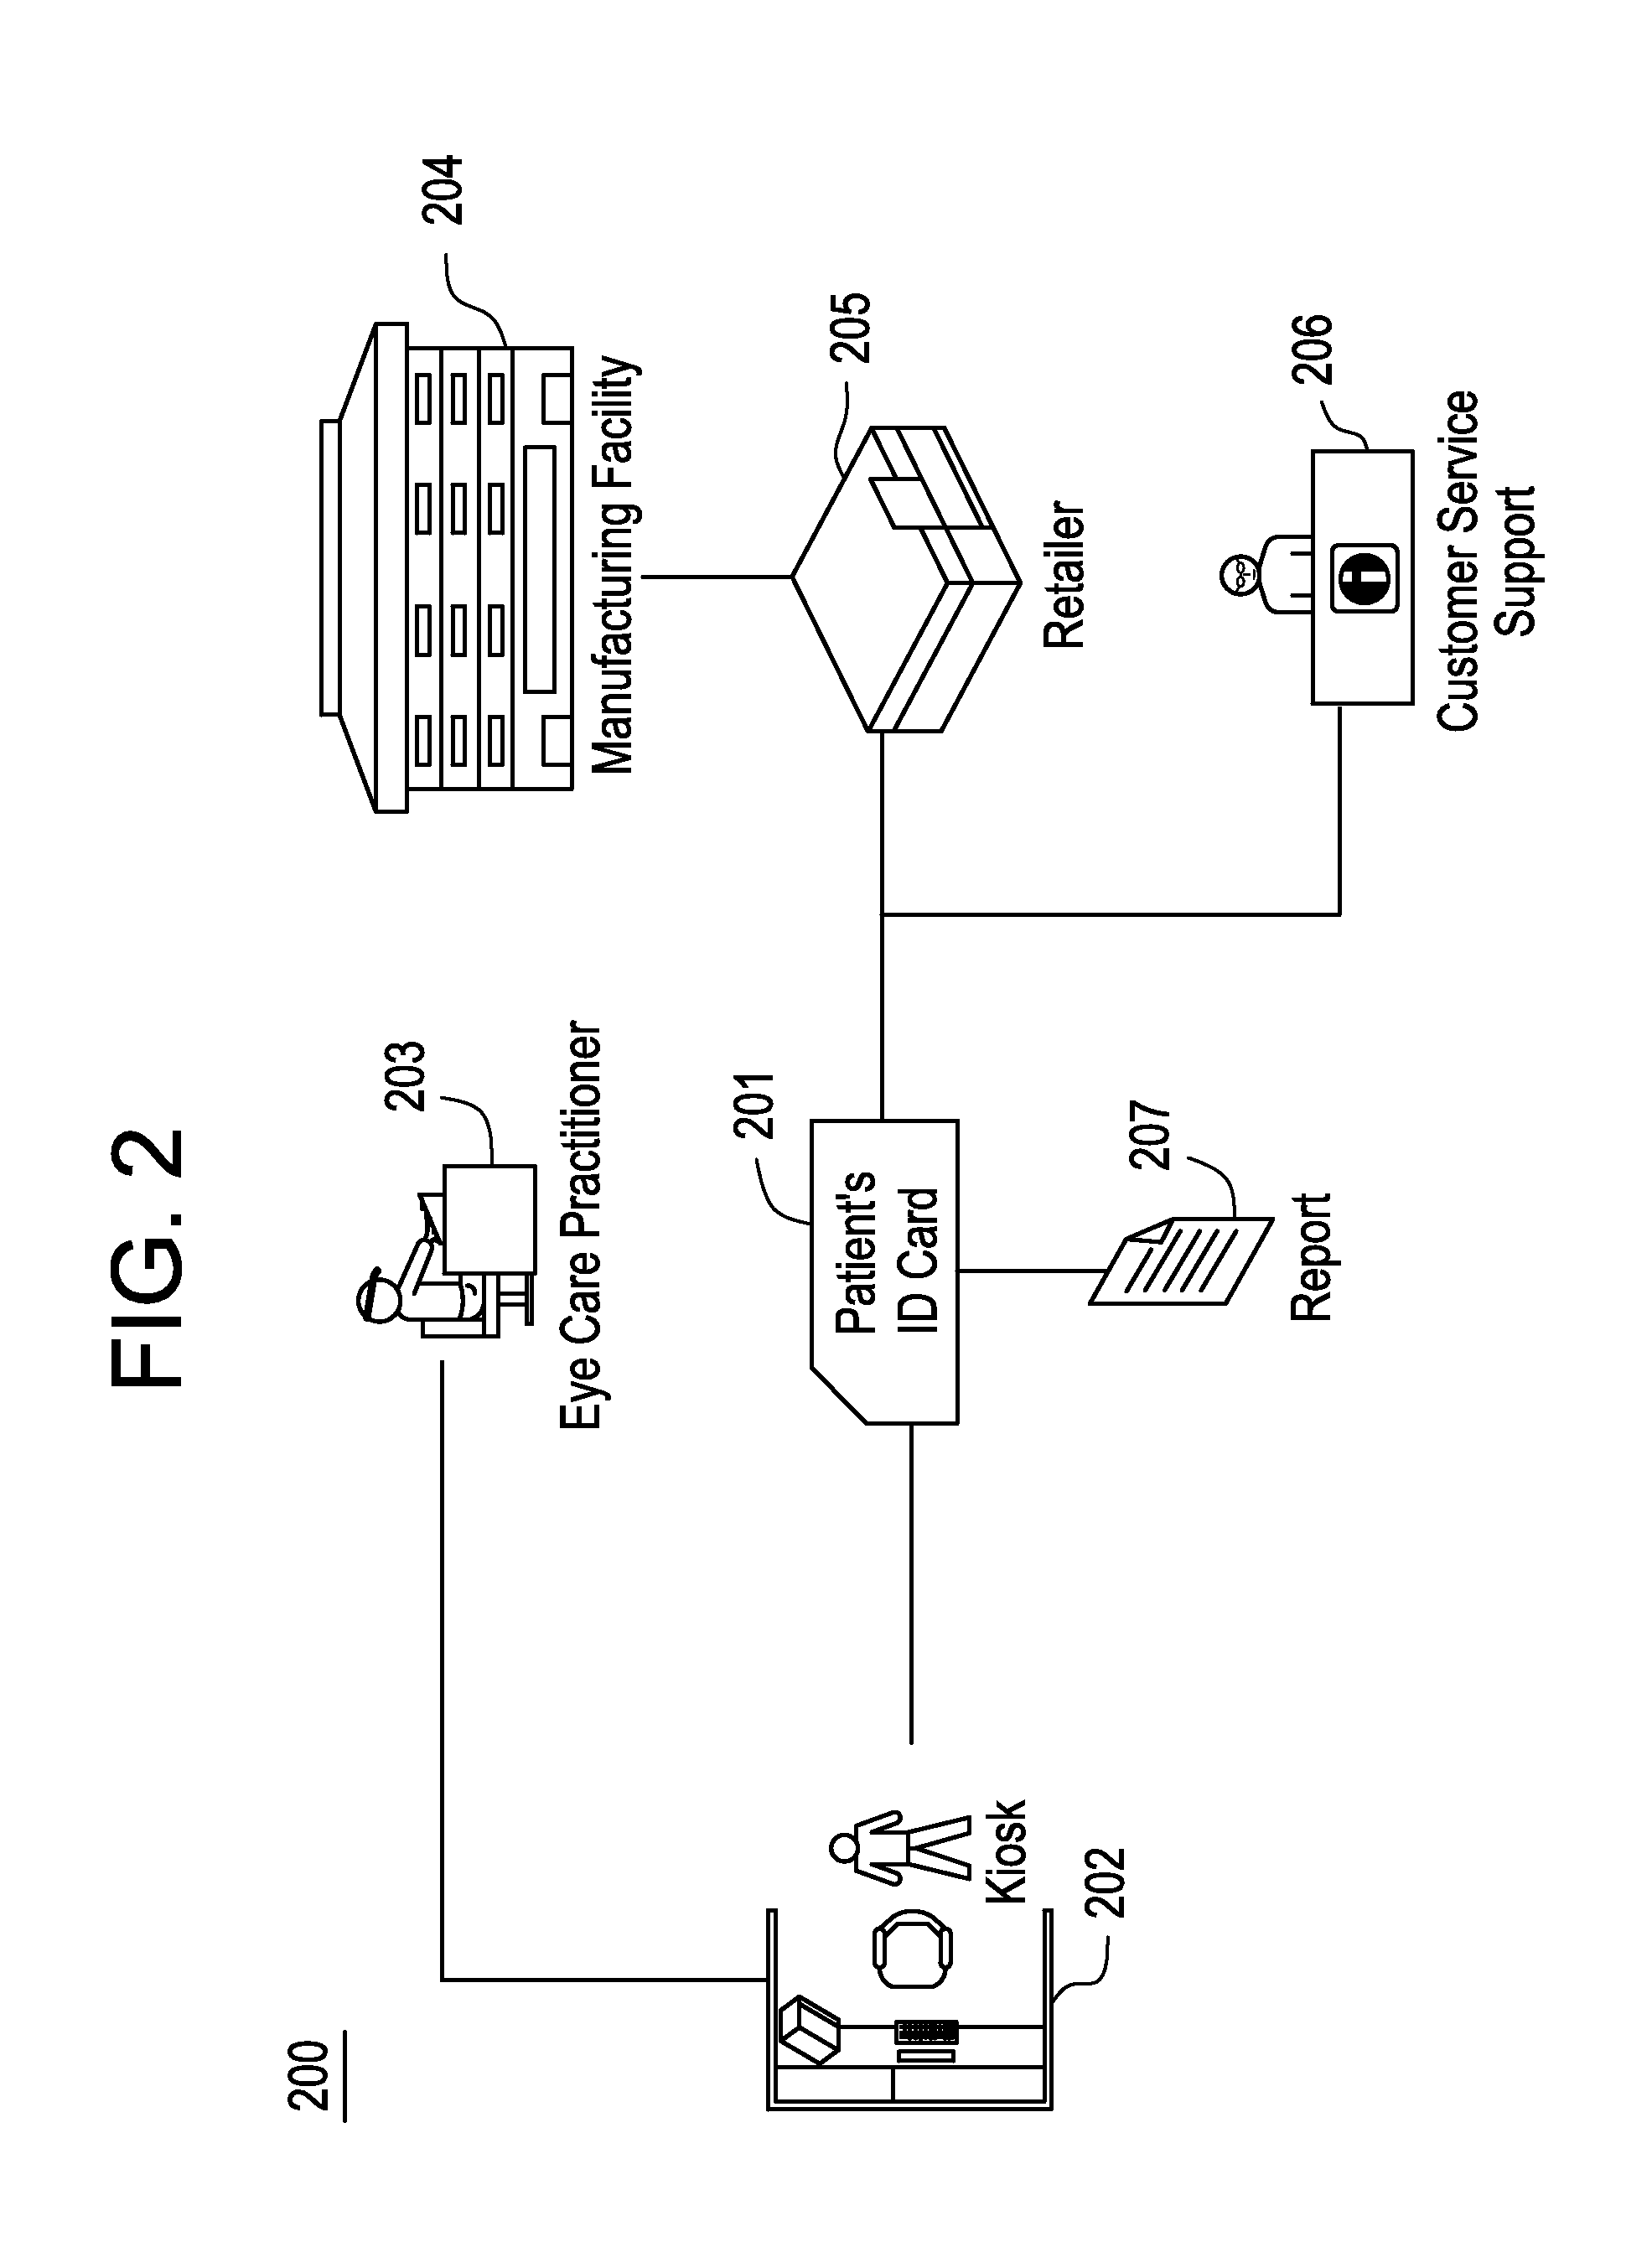 Method and apparatus for engaging and providing vision correction options to patients from a remote location